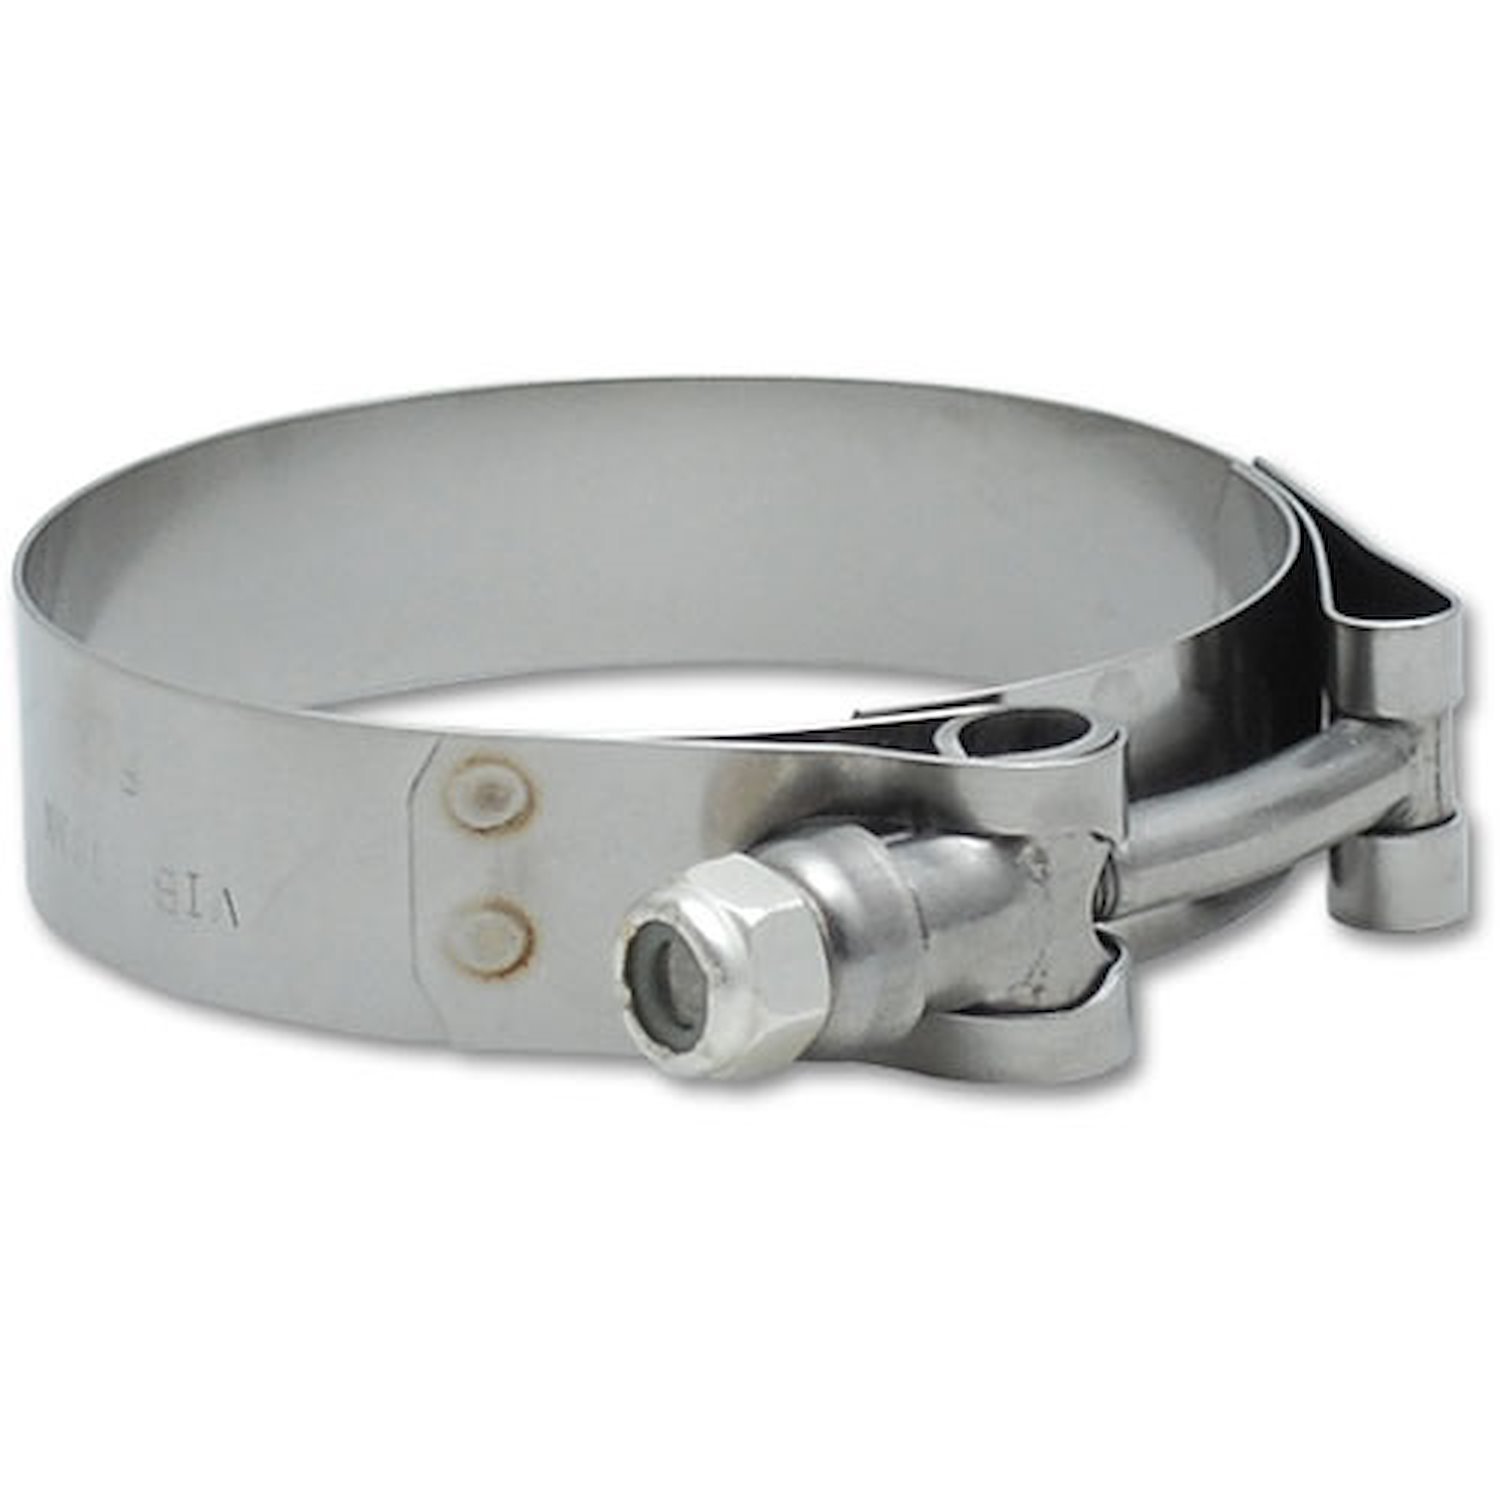 Stainless Steel T-Bolt Clamps Clamp Range 2.75" - 3.10"